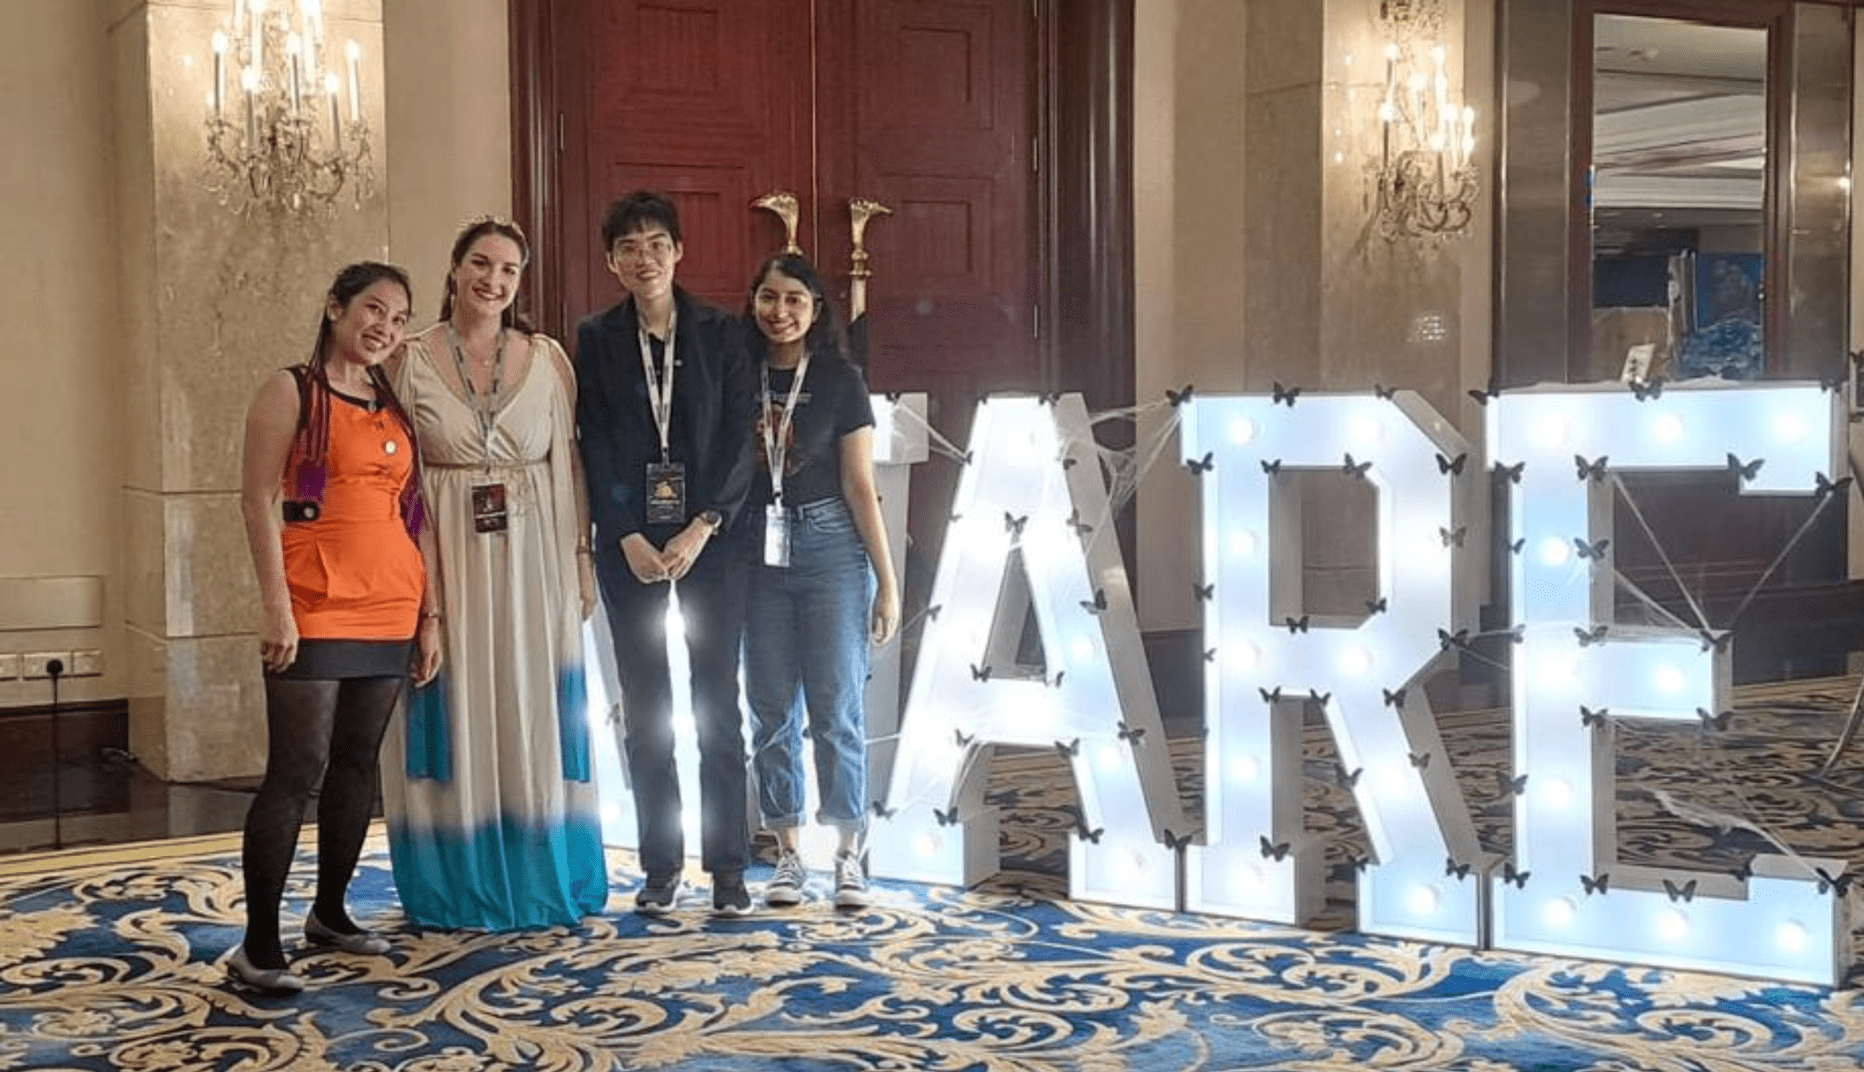 Group photo in front of AWARE sign at AWARE annual ball